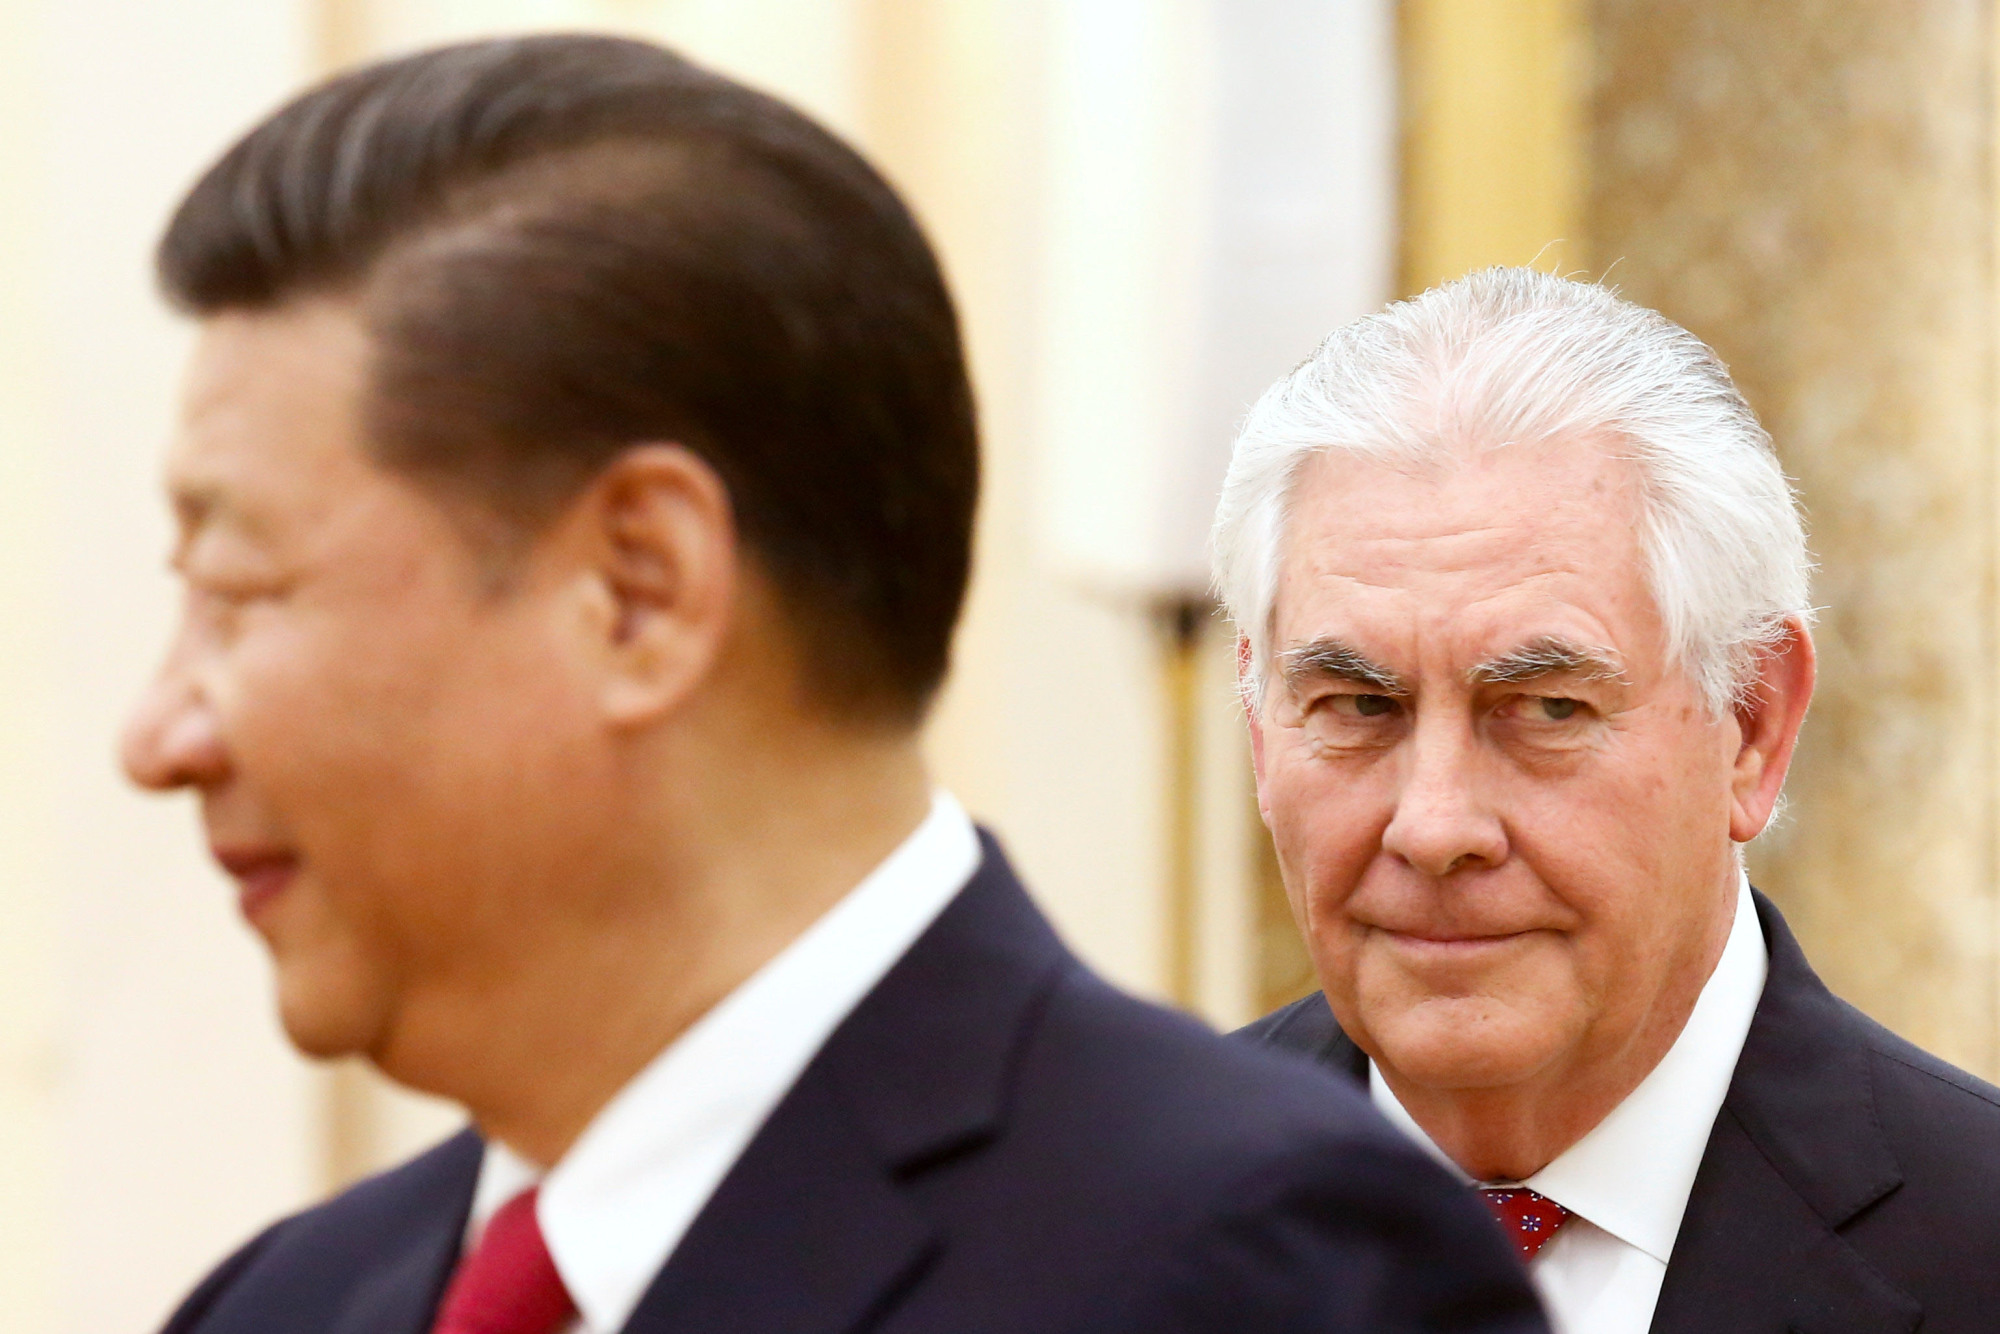 U.S. Secretary of State Rex Tillerson meets Chinese President Xi Jinping at the Great Hall of the People in Beijing on Sunday. | REUTERS